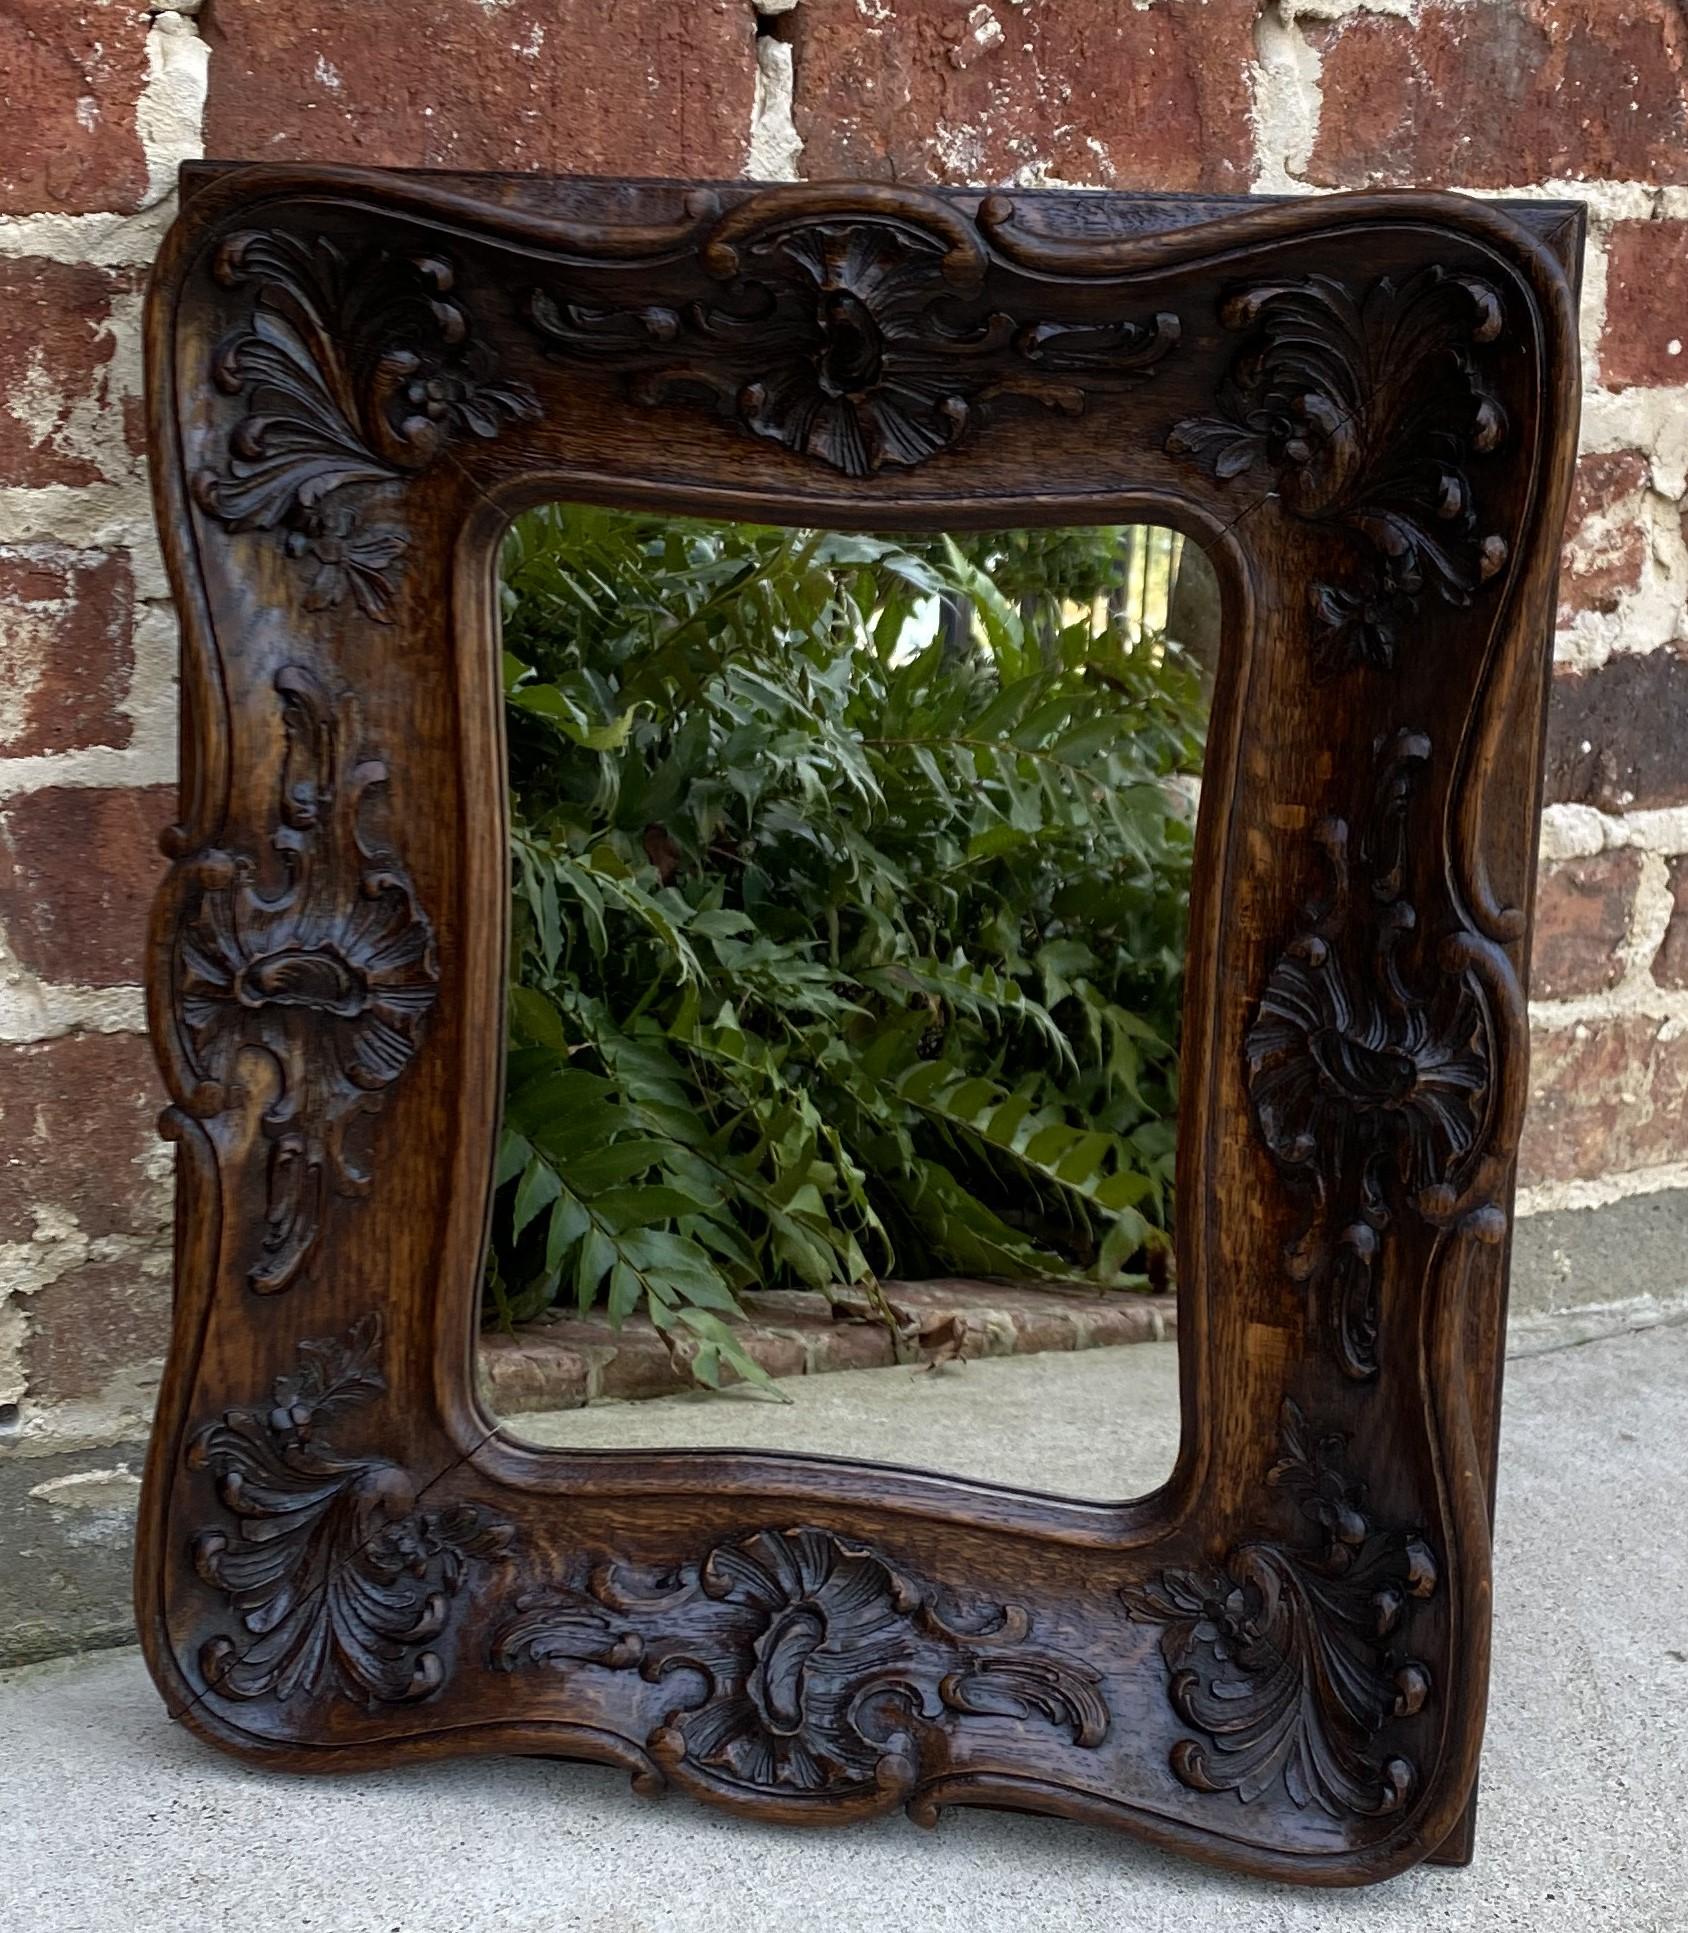 Rococo Revival Antique French Rococo Mirror Carved Oak Wood Back Framed Wall Mirror 1920s